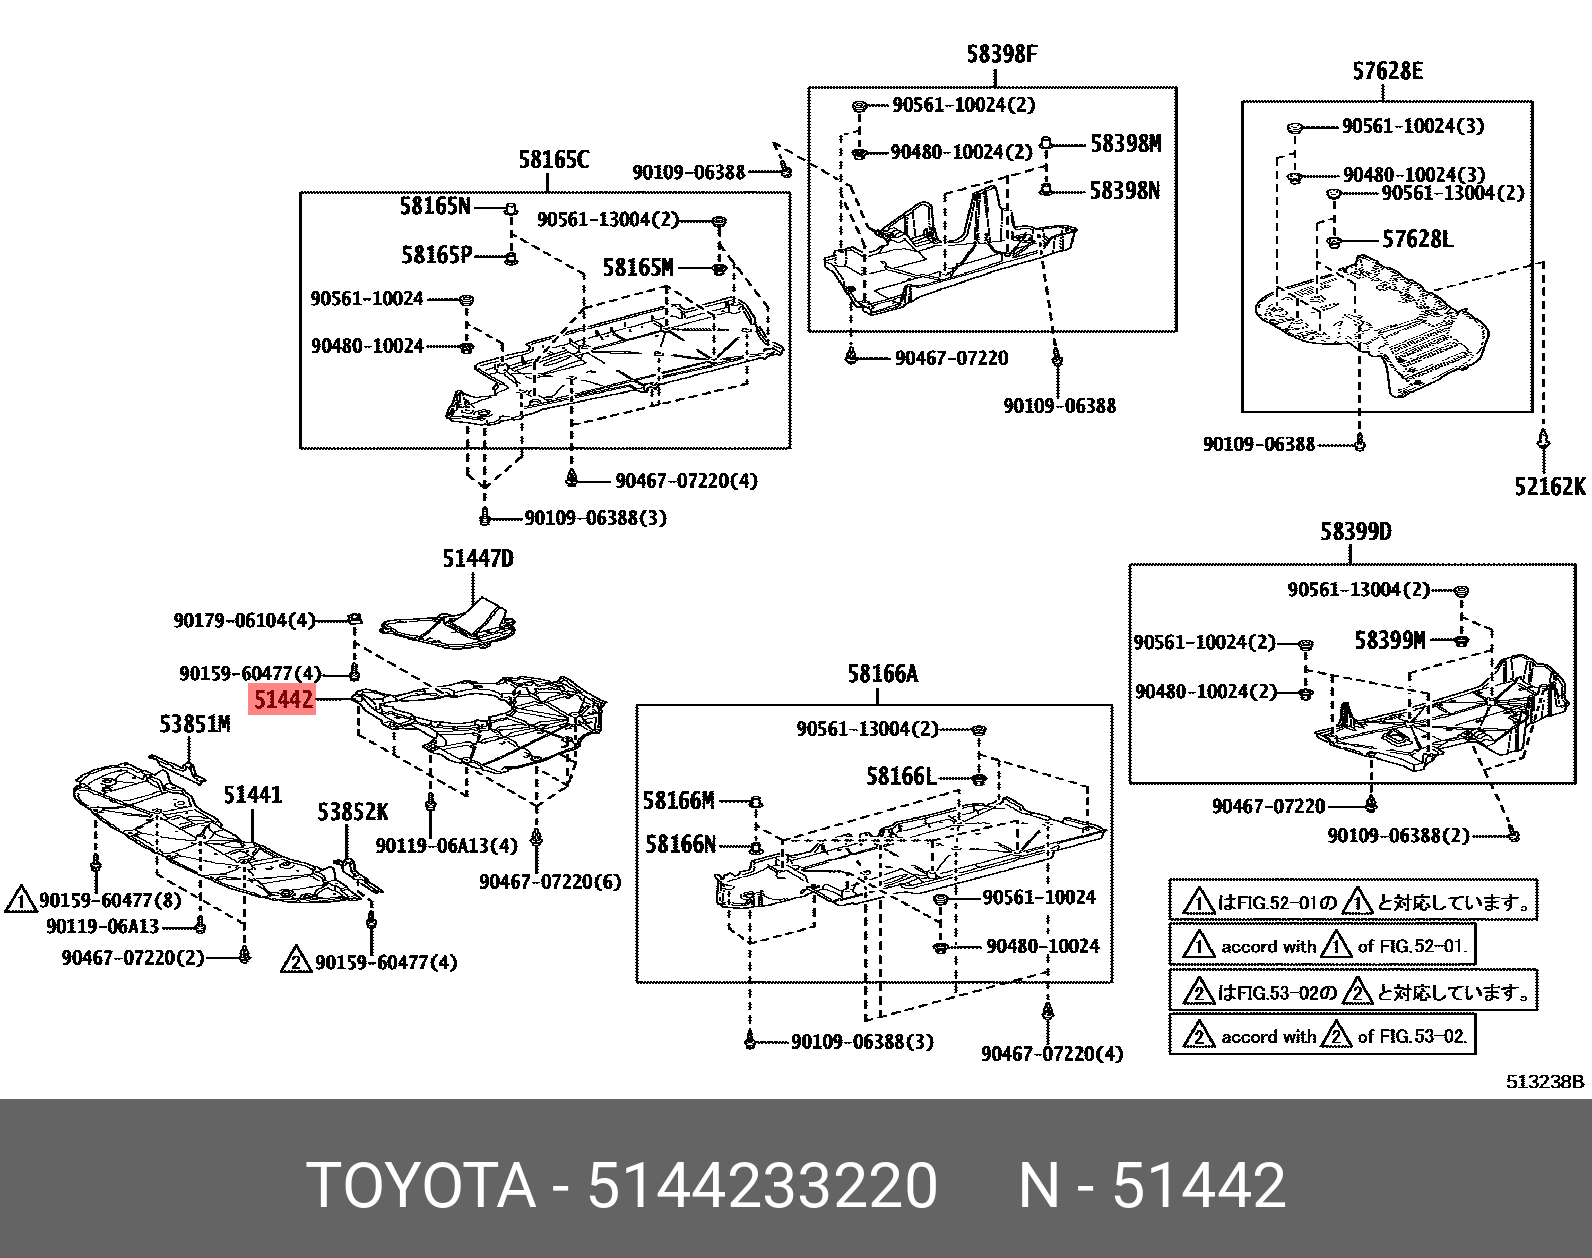 CAMRY 201706-, COVER, ENGINE UNDER, NO.2